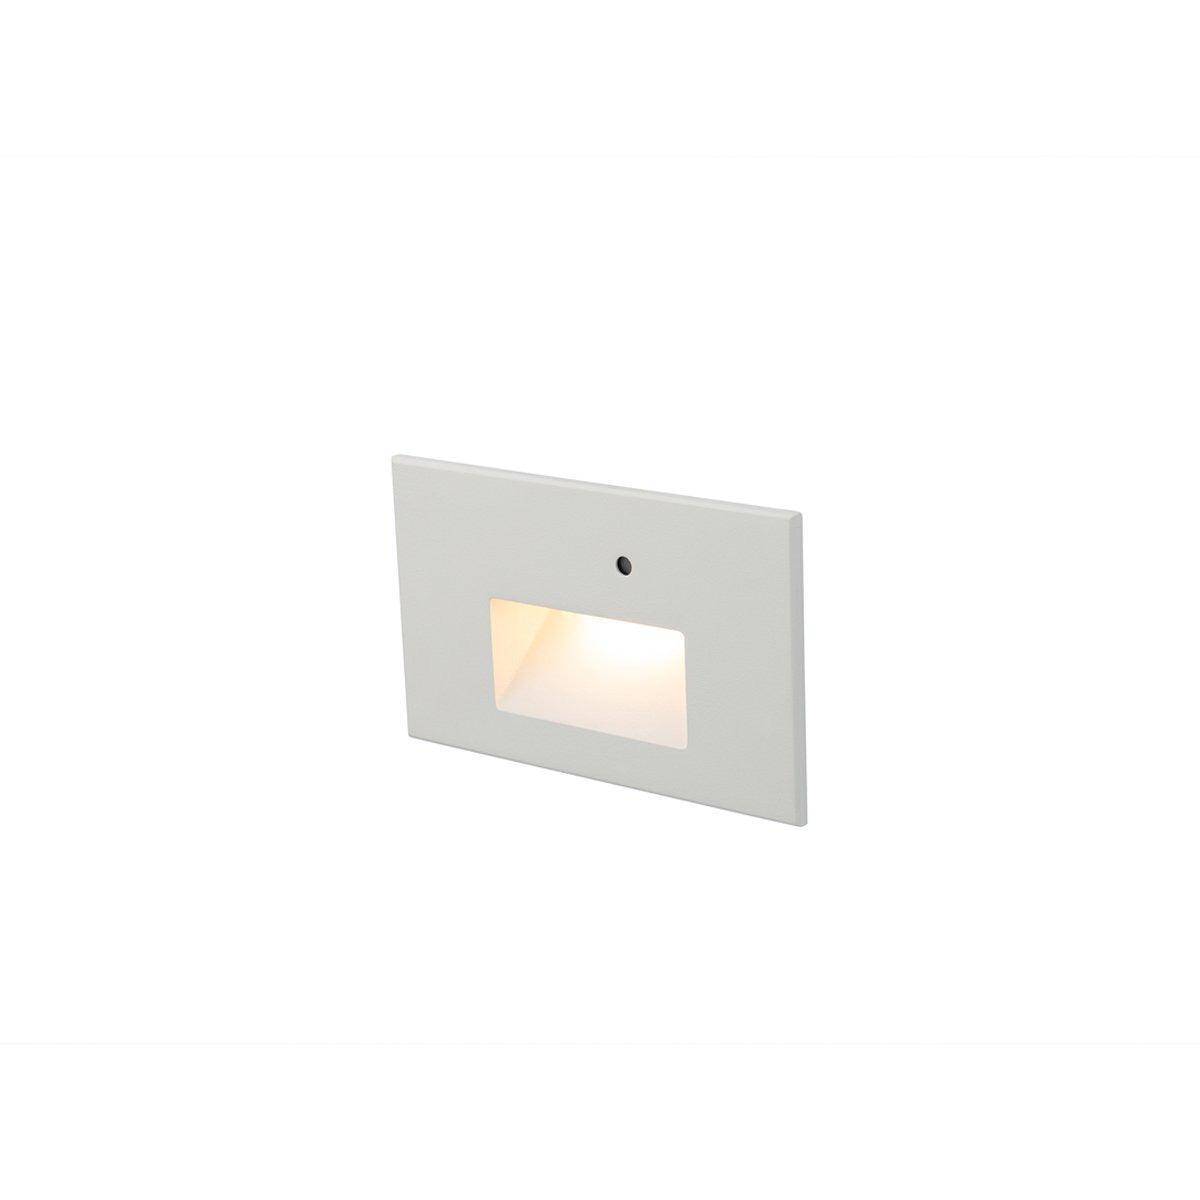 WAC Lighting - Step Light With Photocell Horizontal Anti-Microbial LED Step and Wall Light - WL-LED103-AM-WT | Montreal Lighting & Hardware